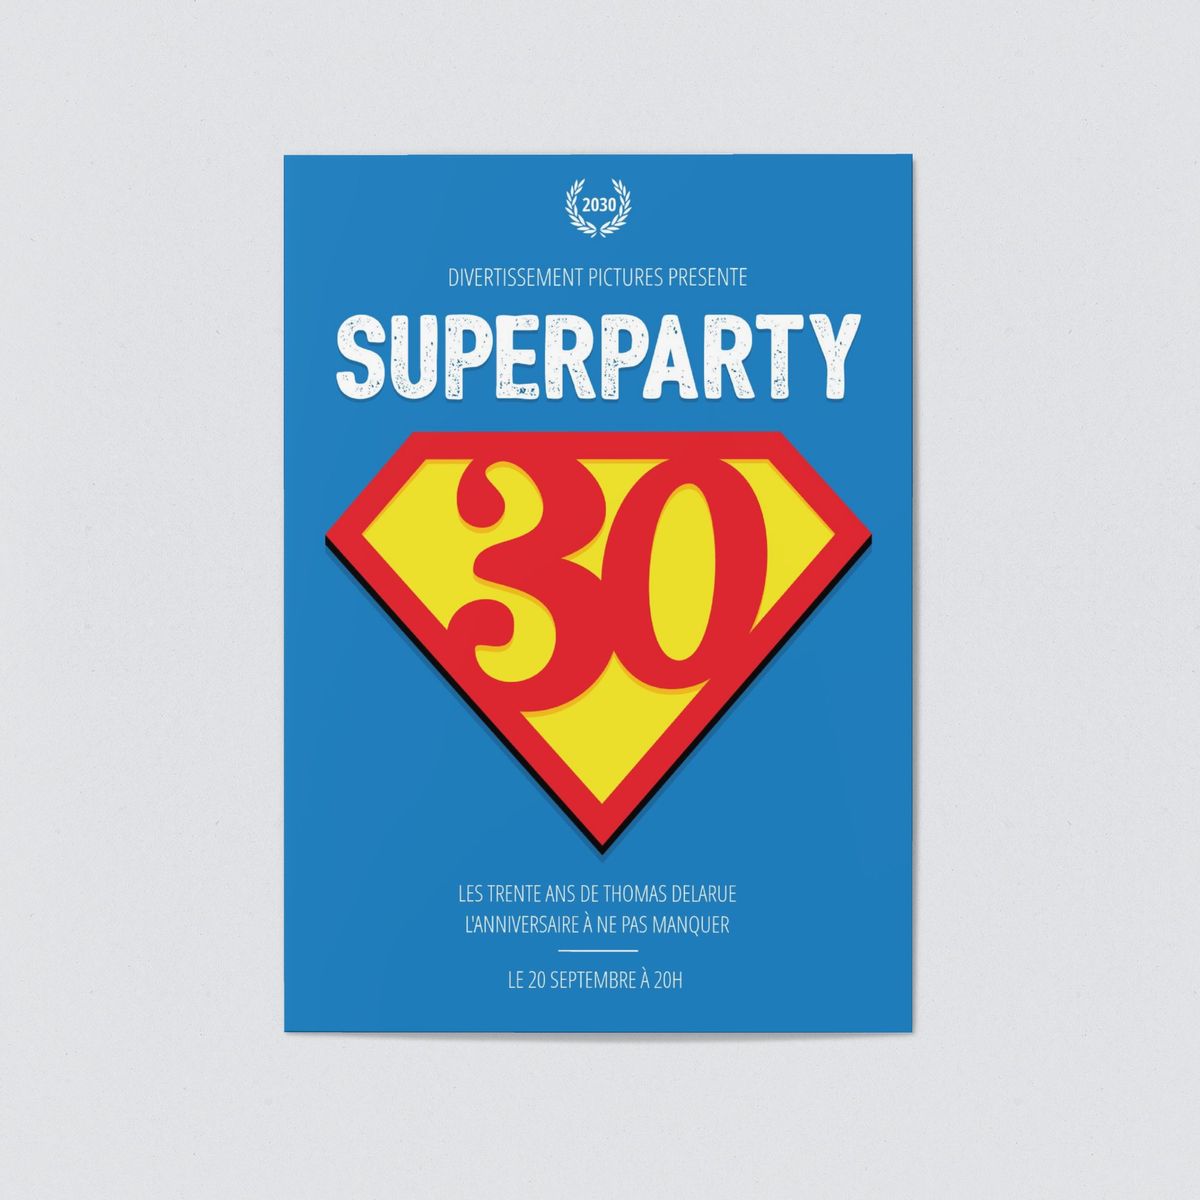 Superparty